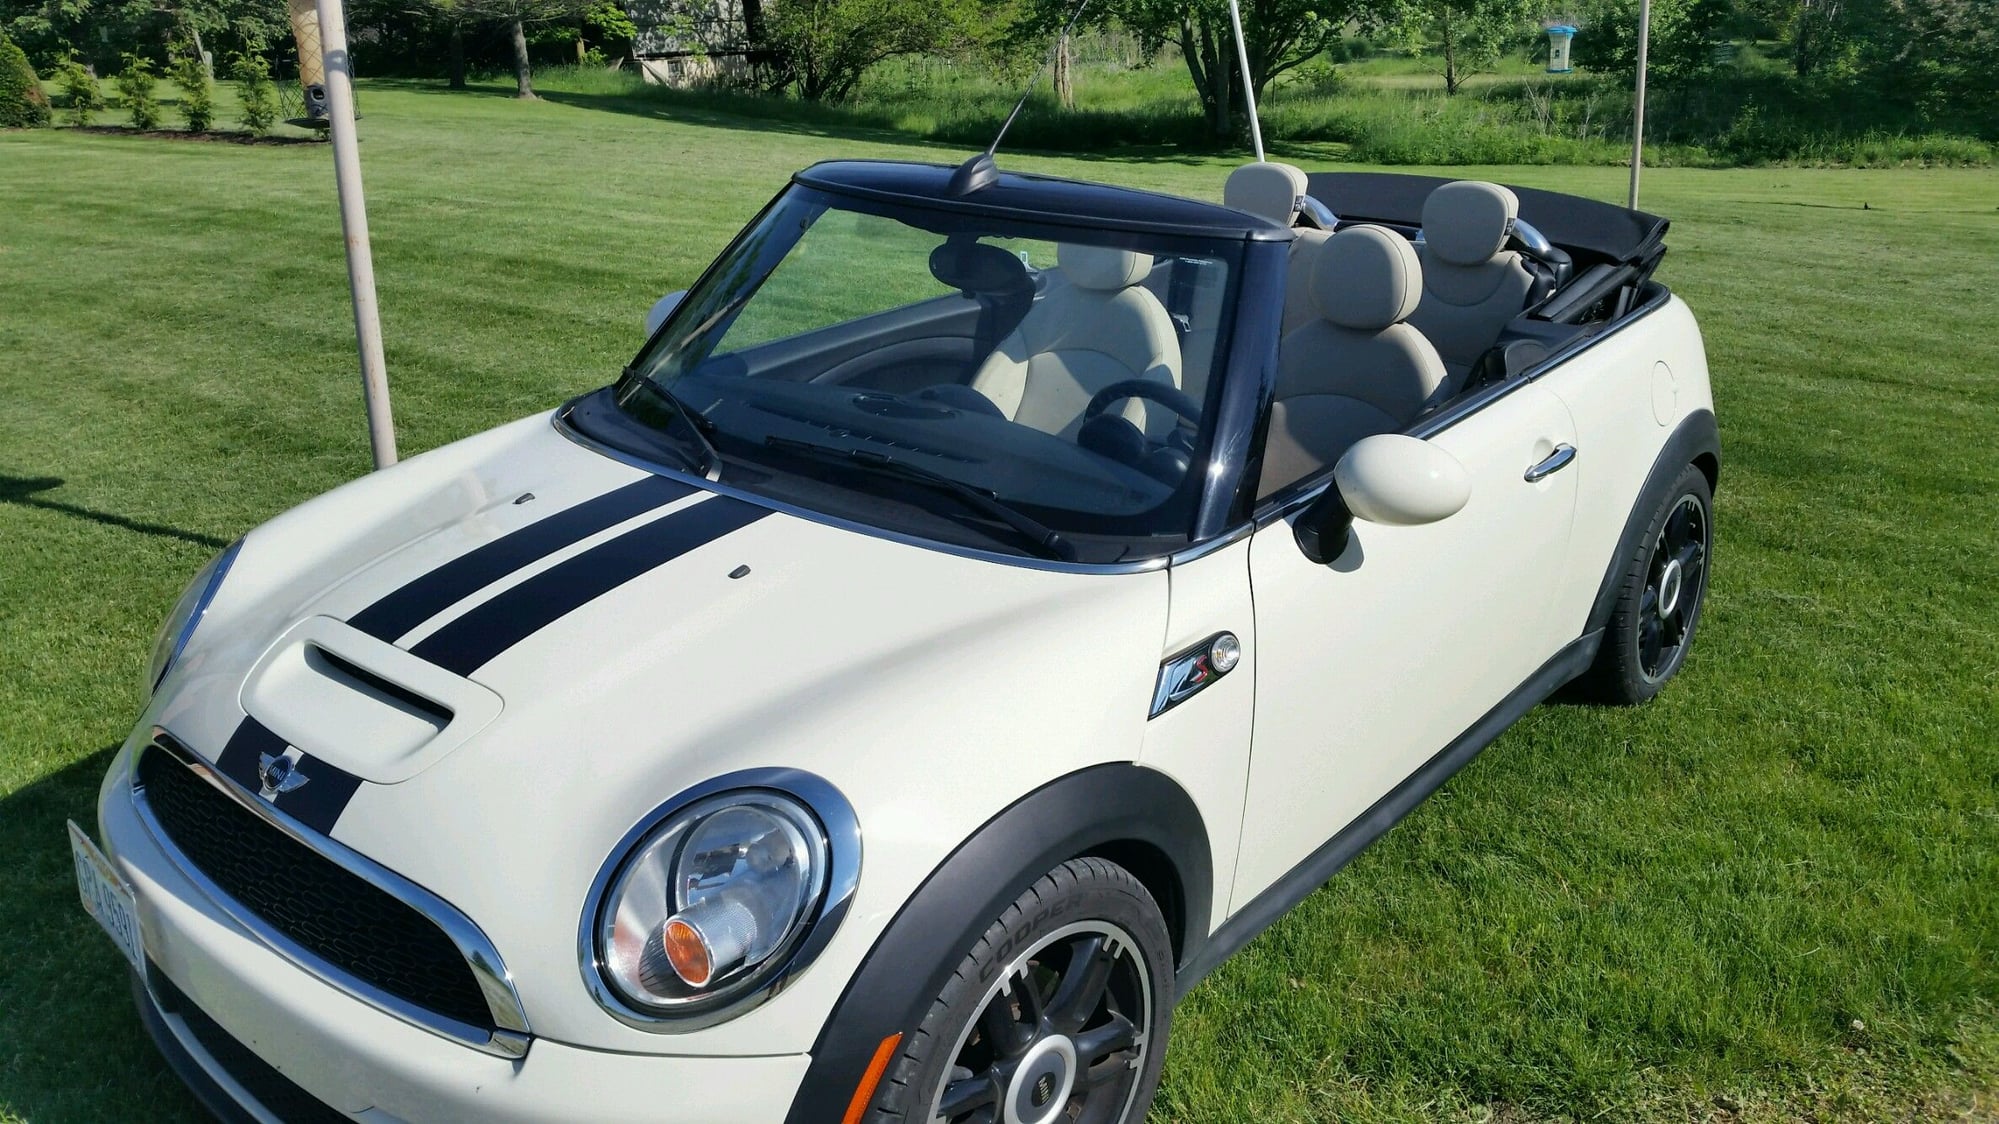 R57 Post Pictures of Your R57 Convertible - Page 17 - North American ...